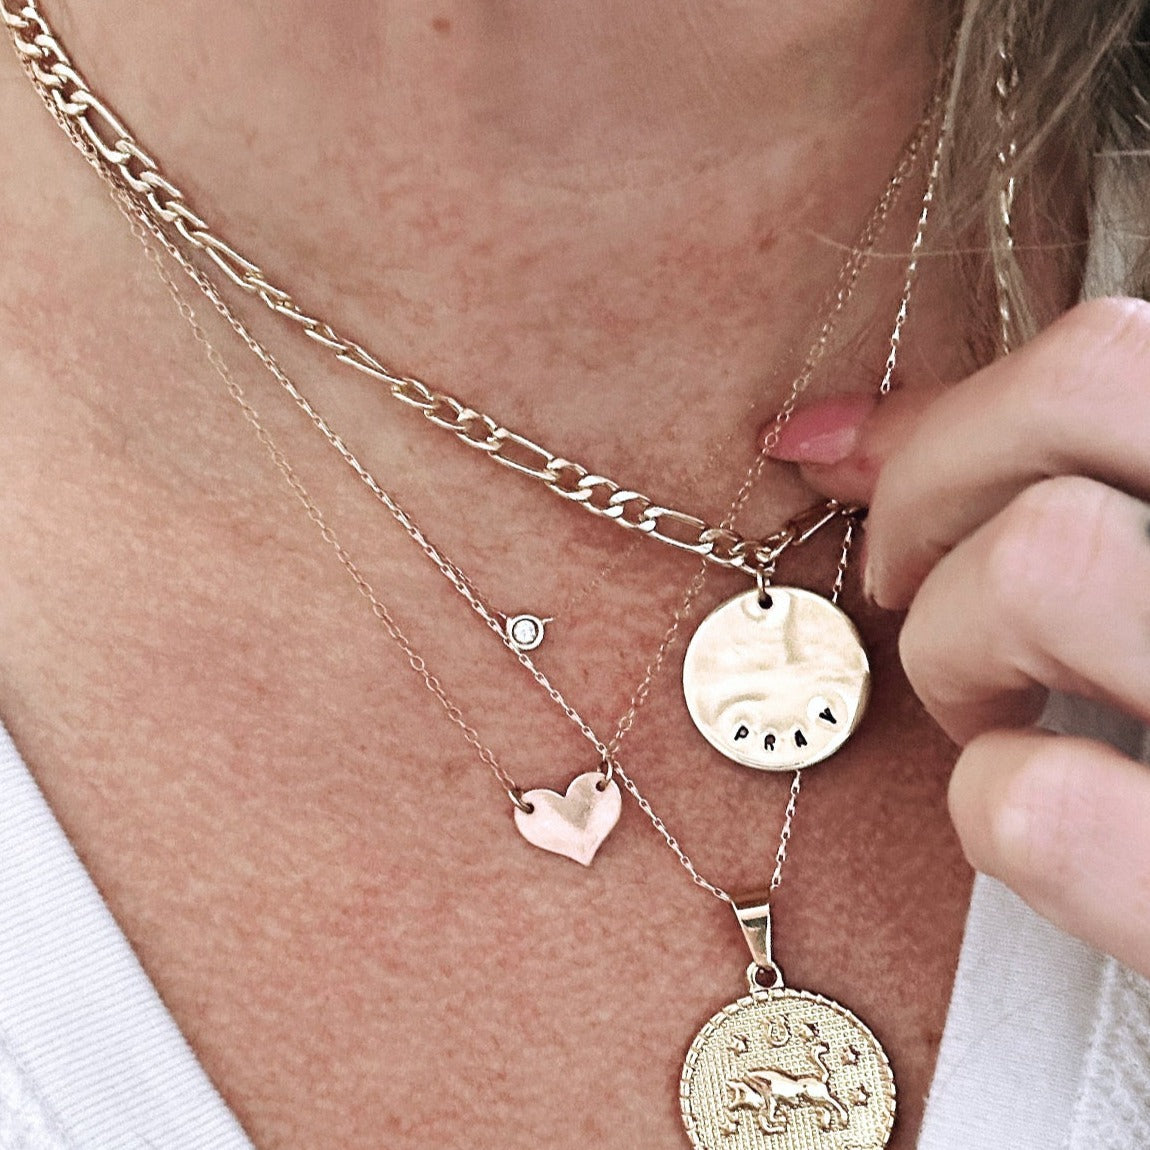 The Disc Necklace